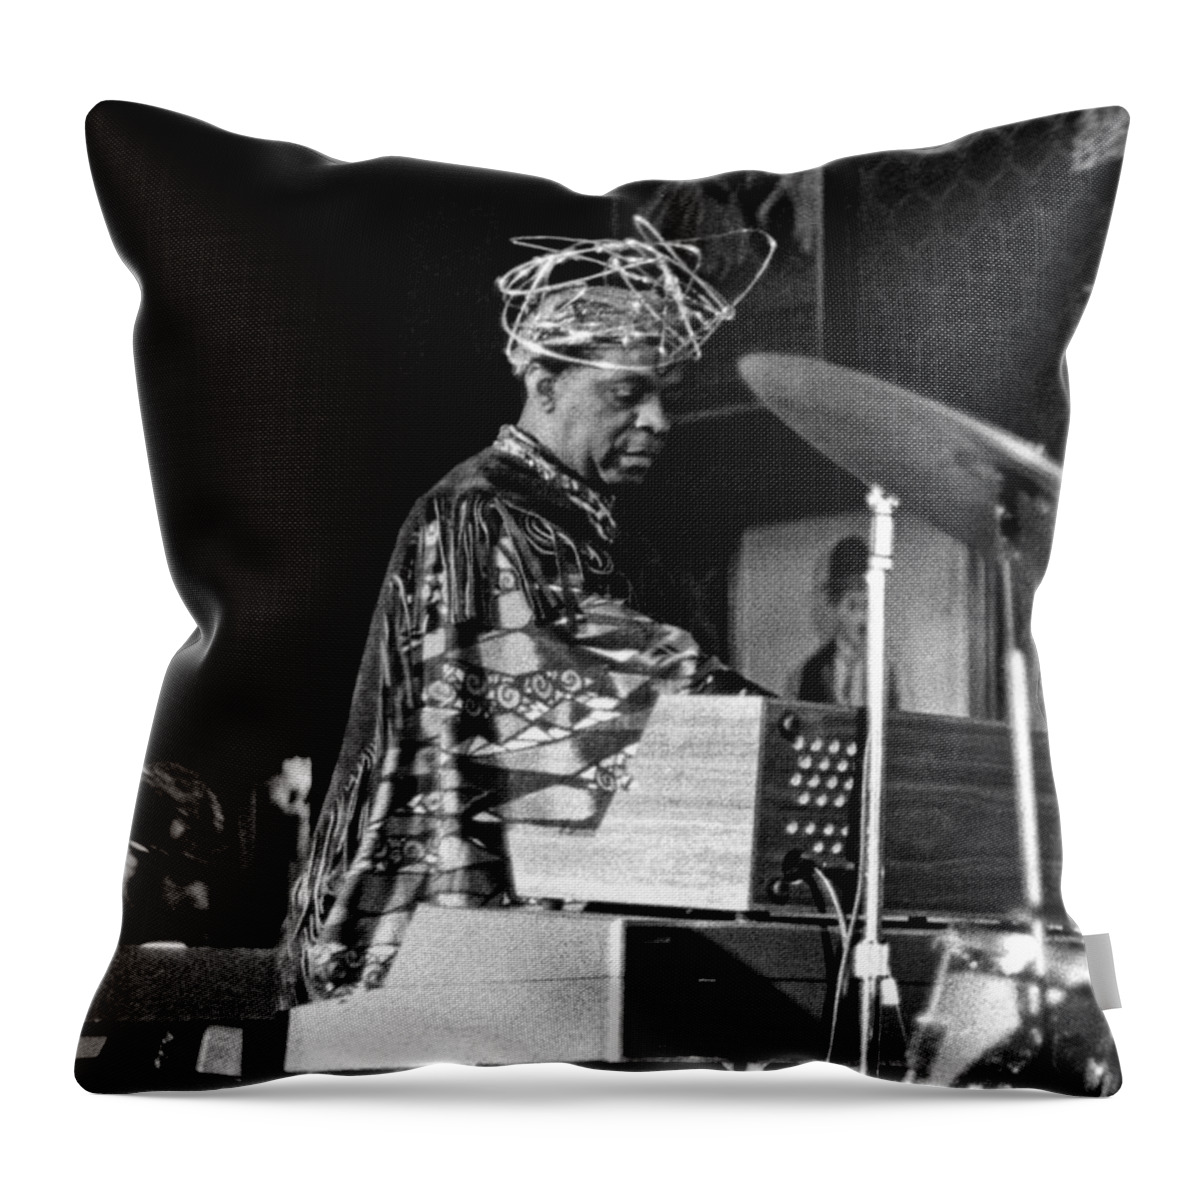 Sun Ra Arkestra At The Red Garter 1970 Nyc Throw Pillow featuring the photograph Sun Ra 2 by Lee Santa